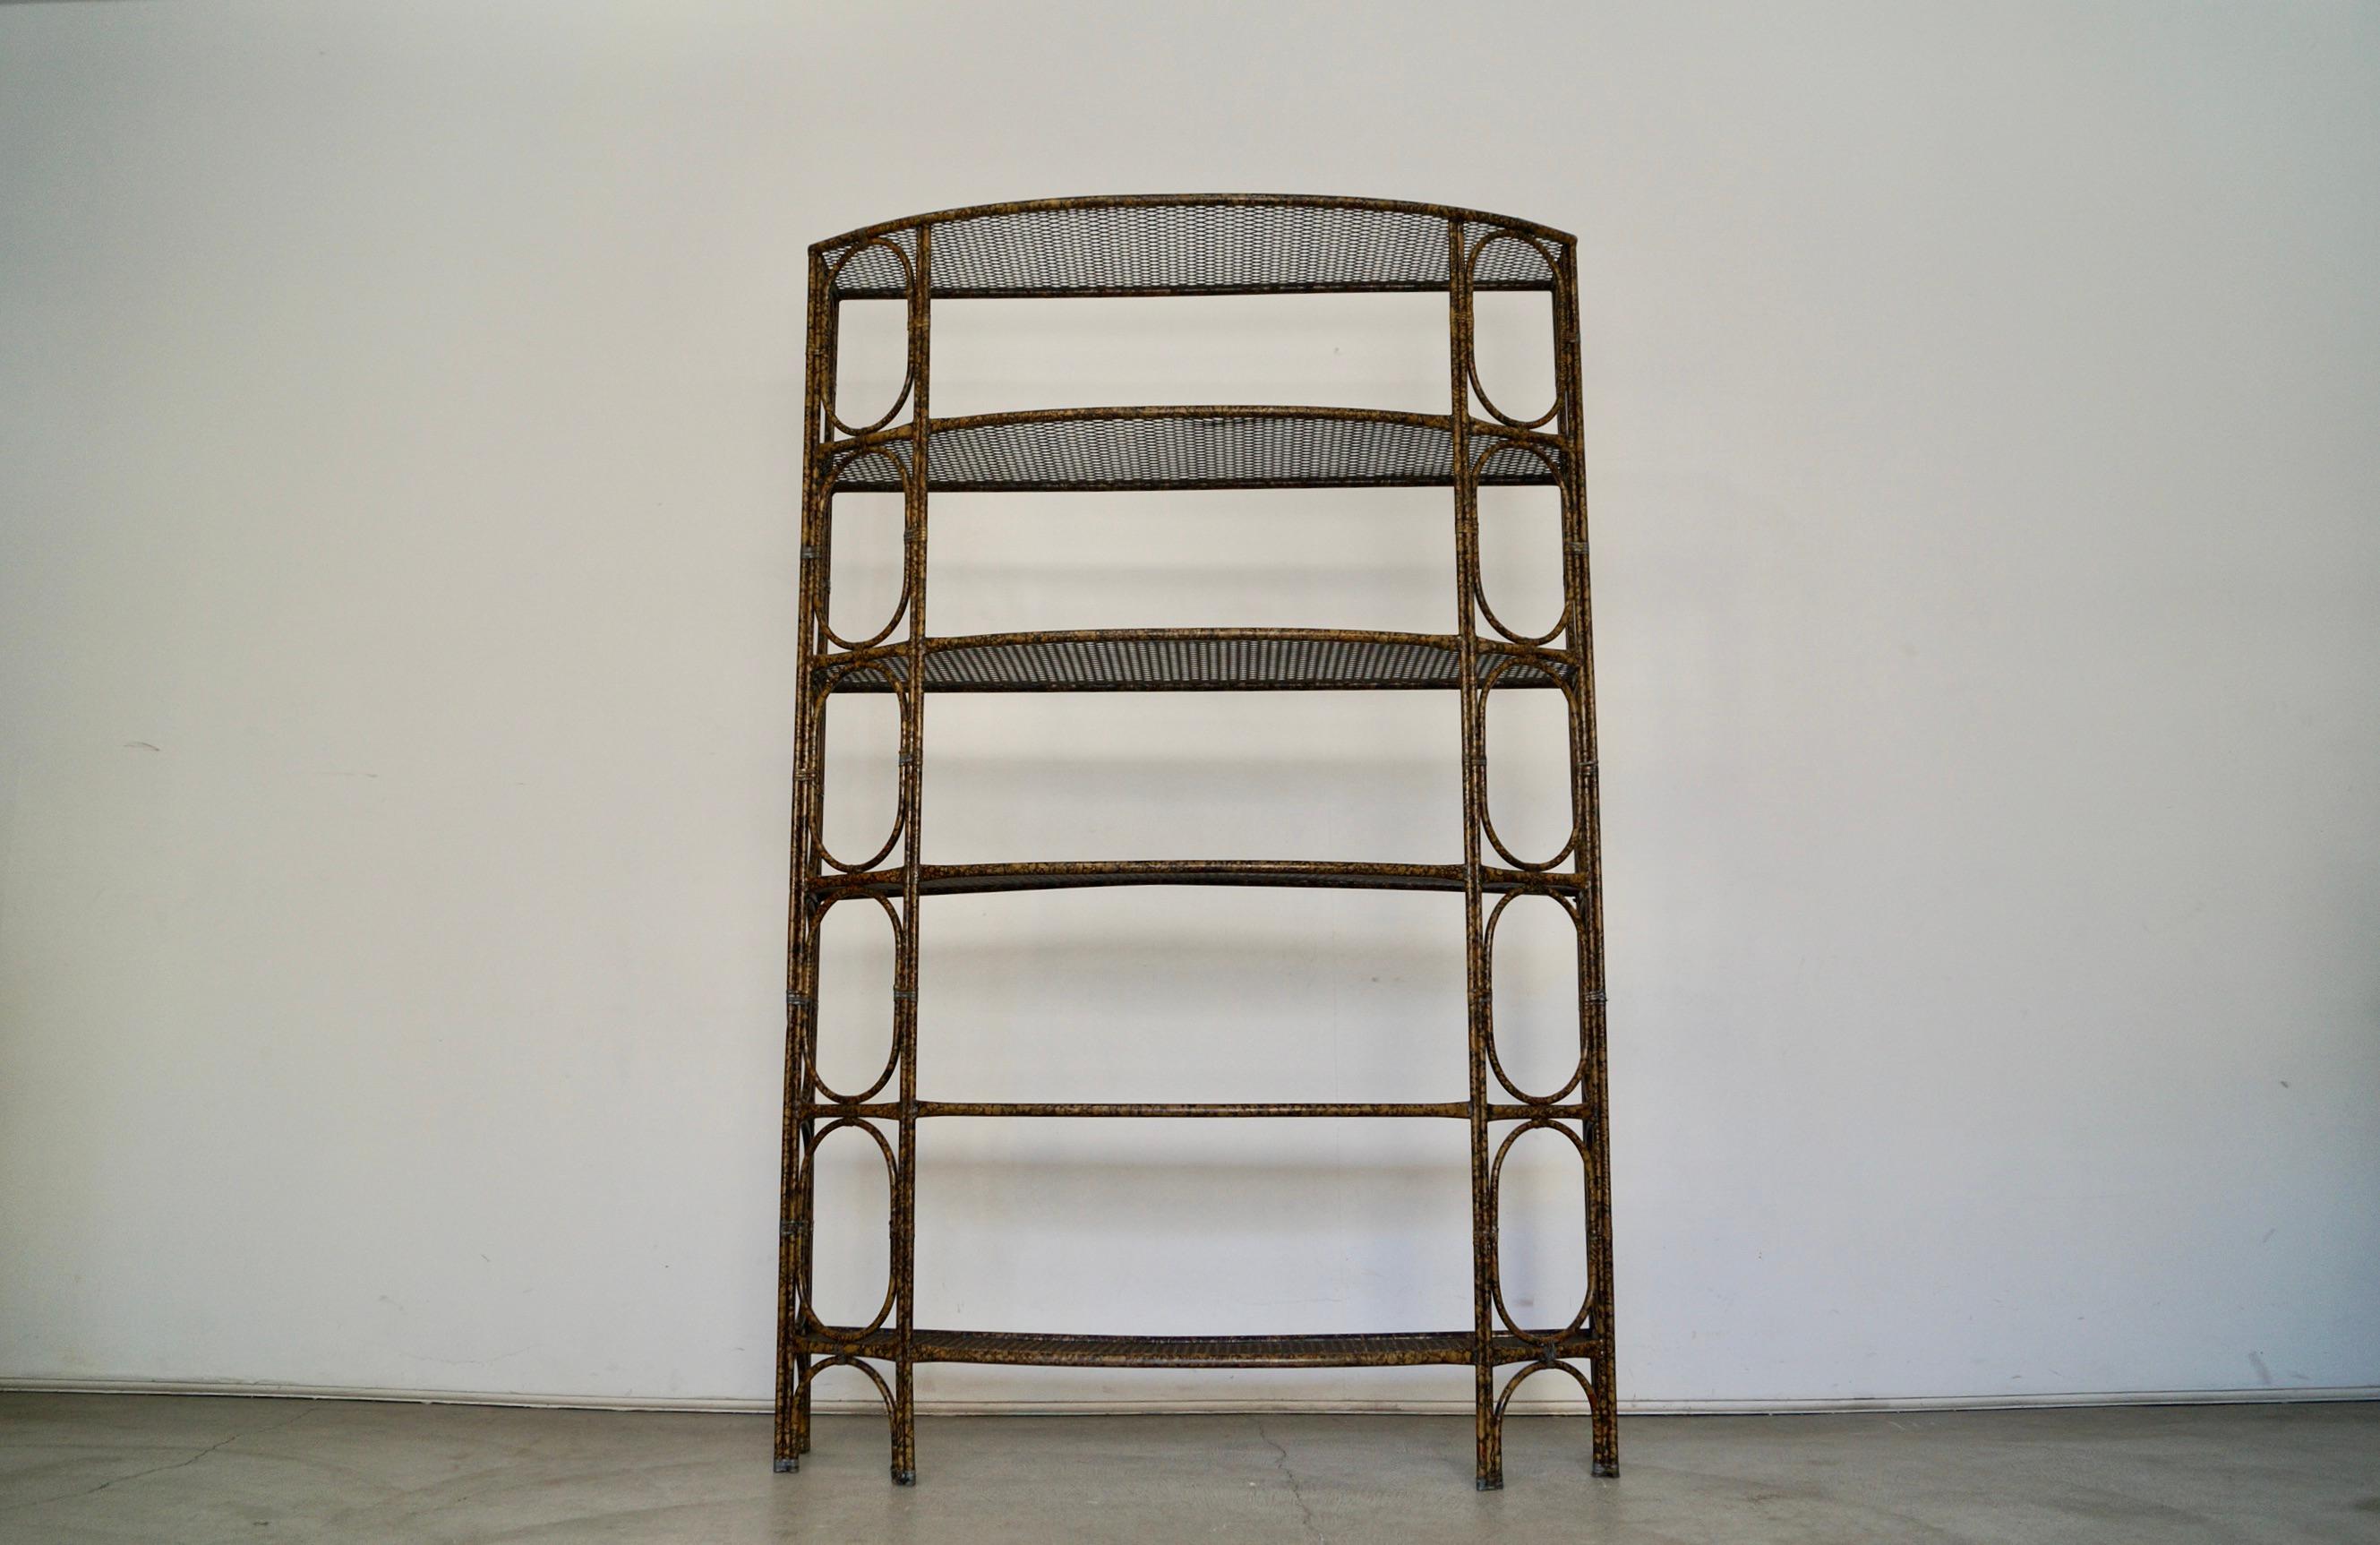 Vintage 1970s Hollywood Regency metal shelf for sale. Very unique designer shelf with a very unique finish. It's made of metal with a rattan design and perforated metal shelves. It has six shelves, and can be used as a divider or etagere. The color